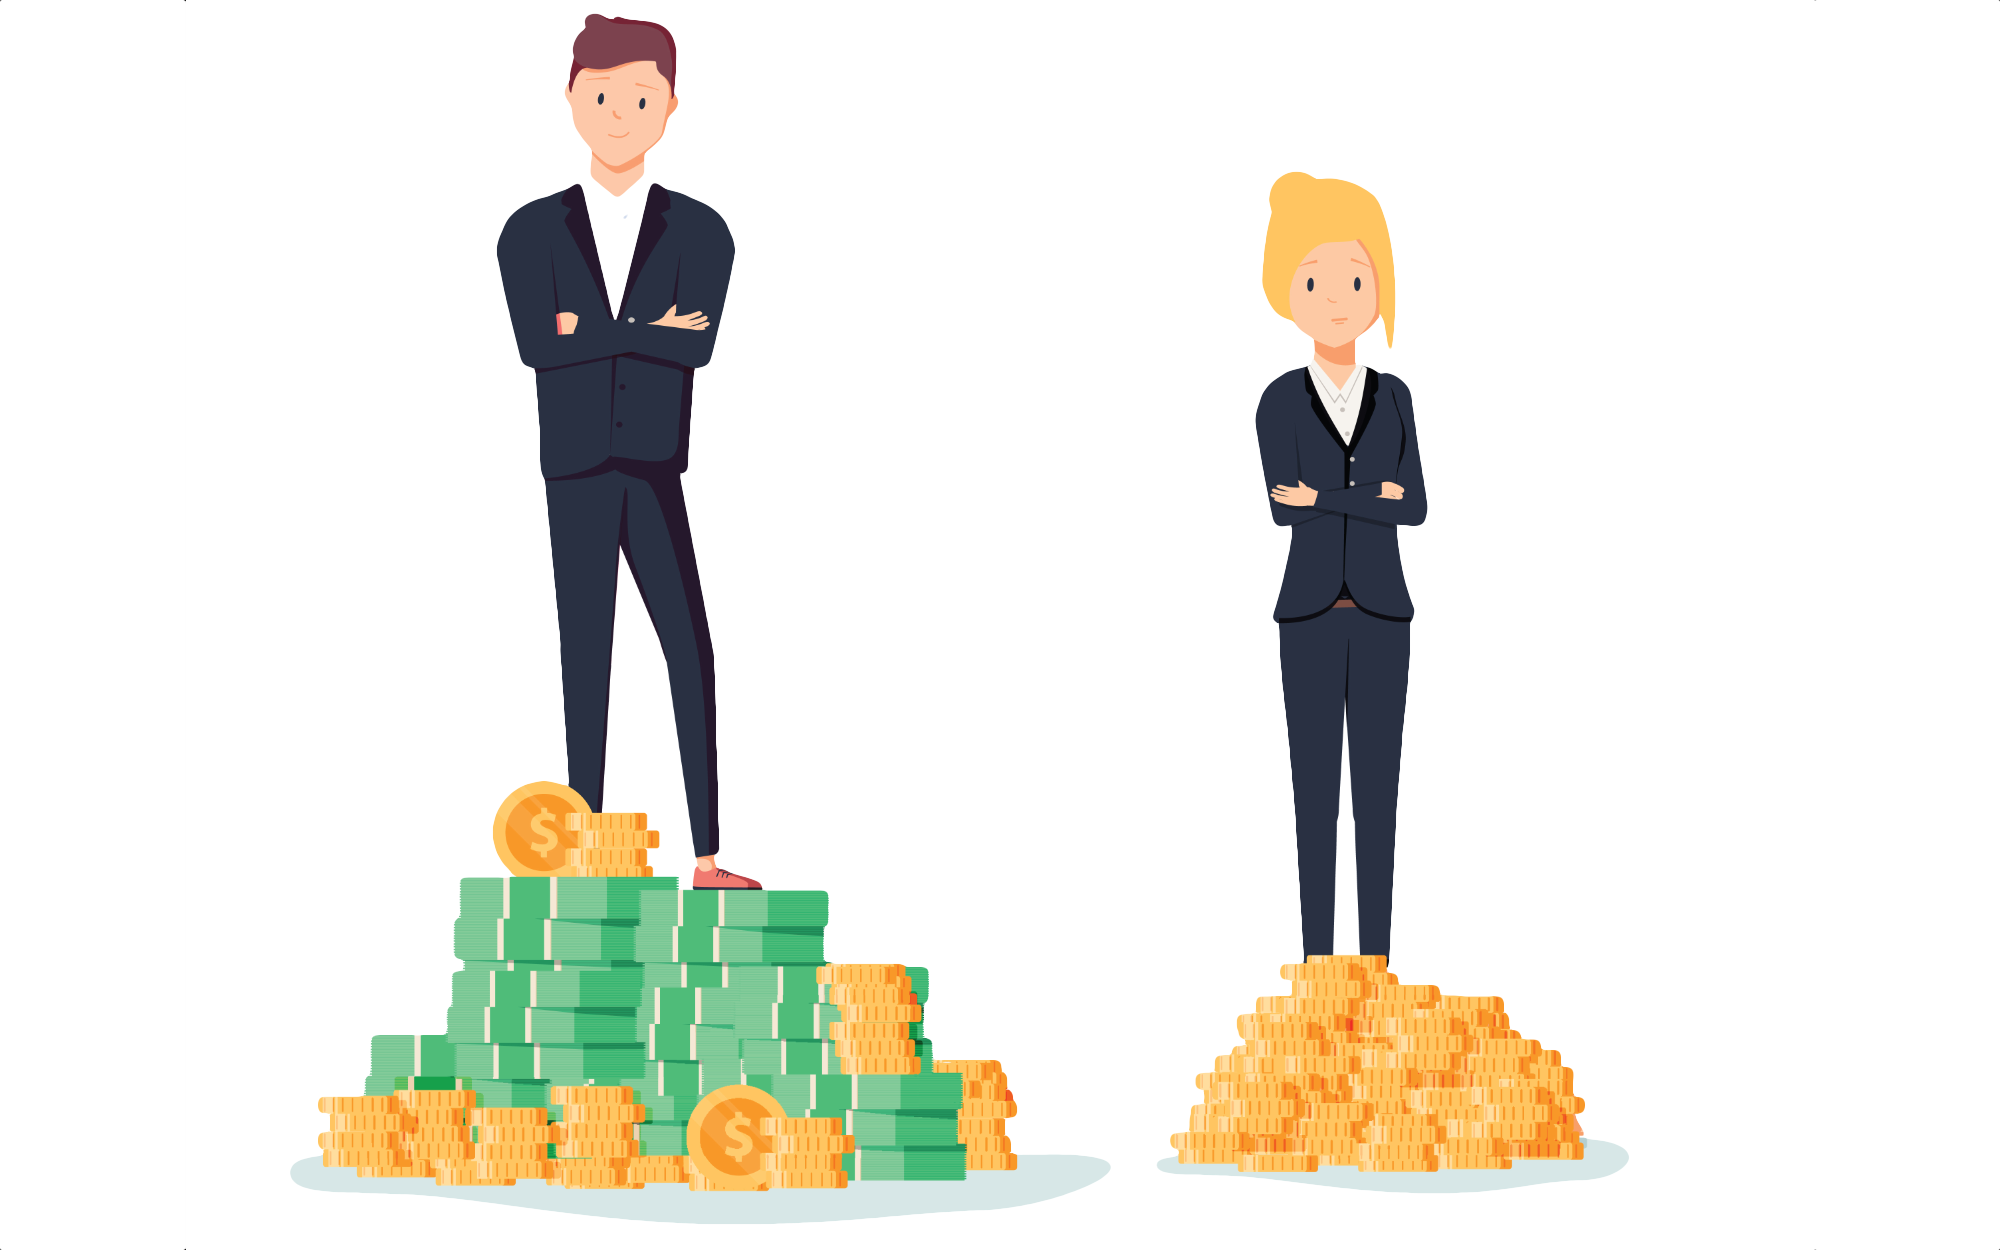 gender pay gap image of man and woman